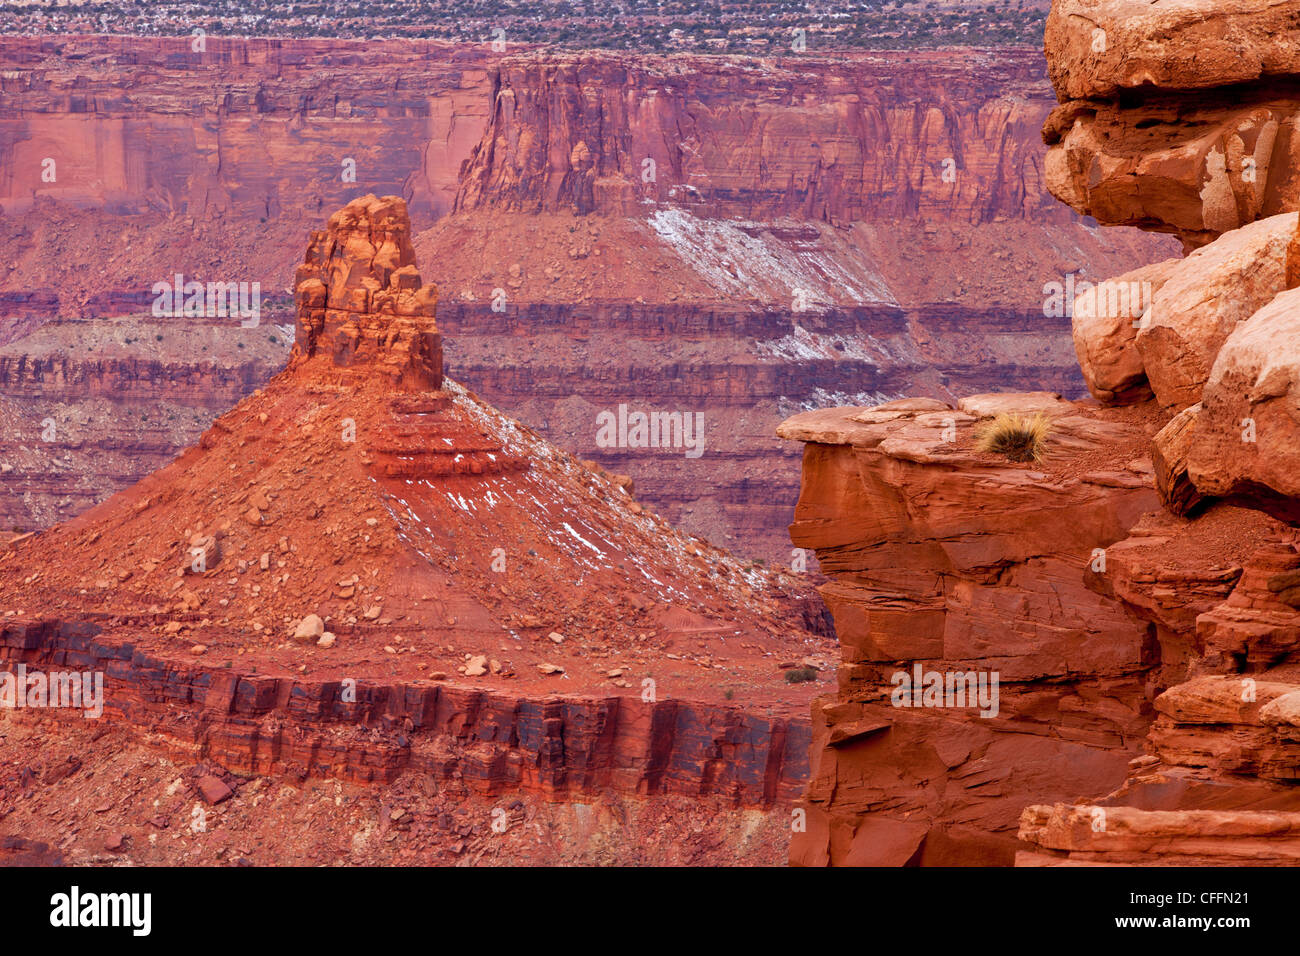 Rock formations at Dead Horse Point State Park, Moab Utah, USA Stock Photo